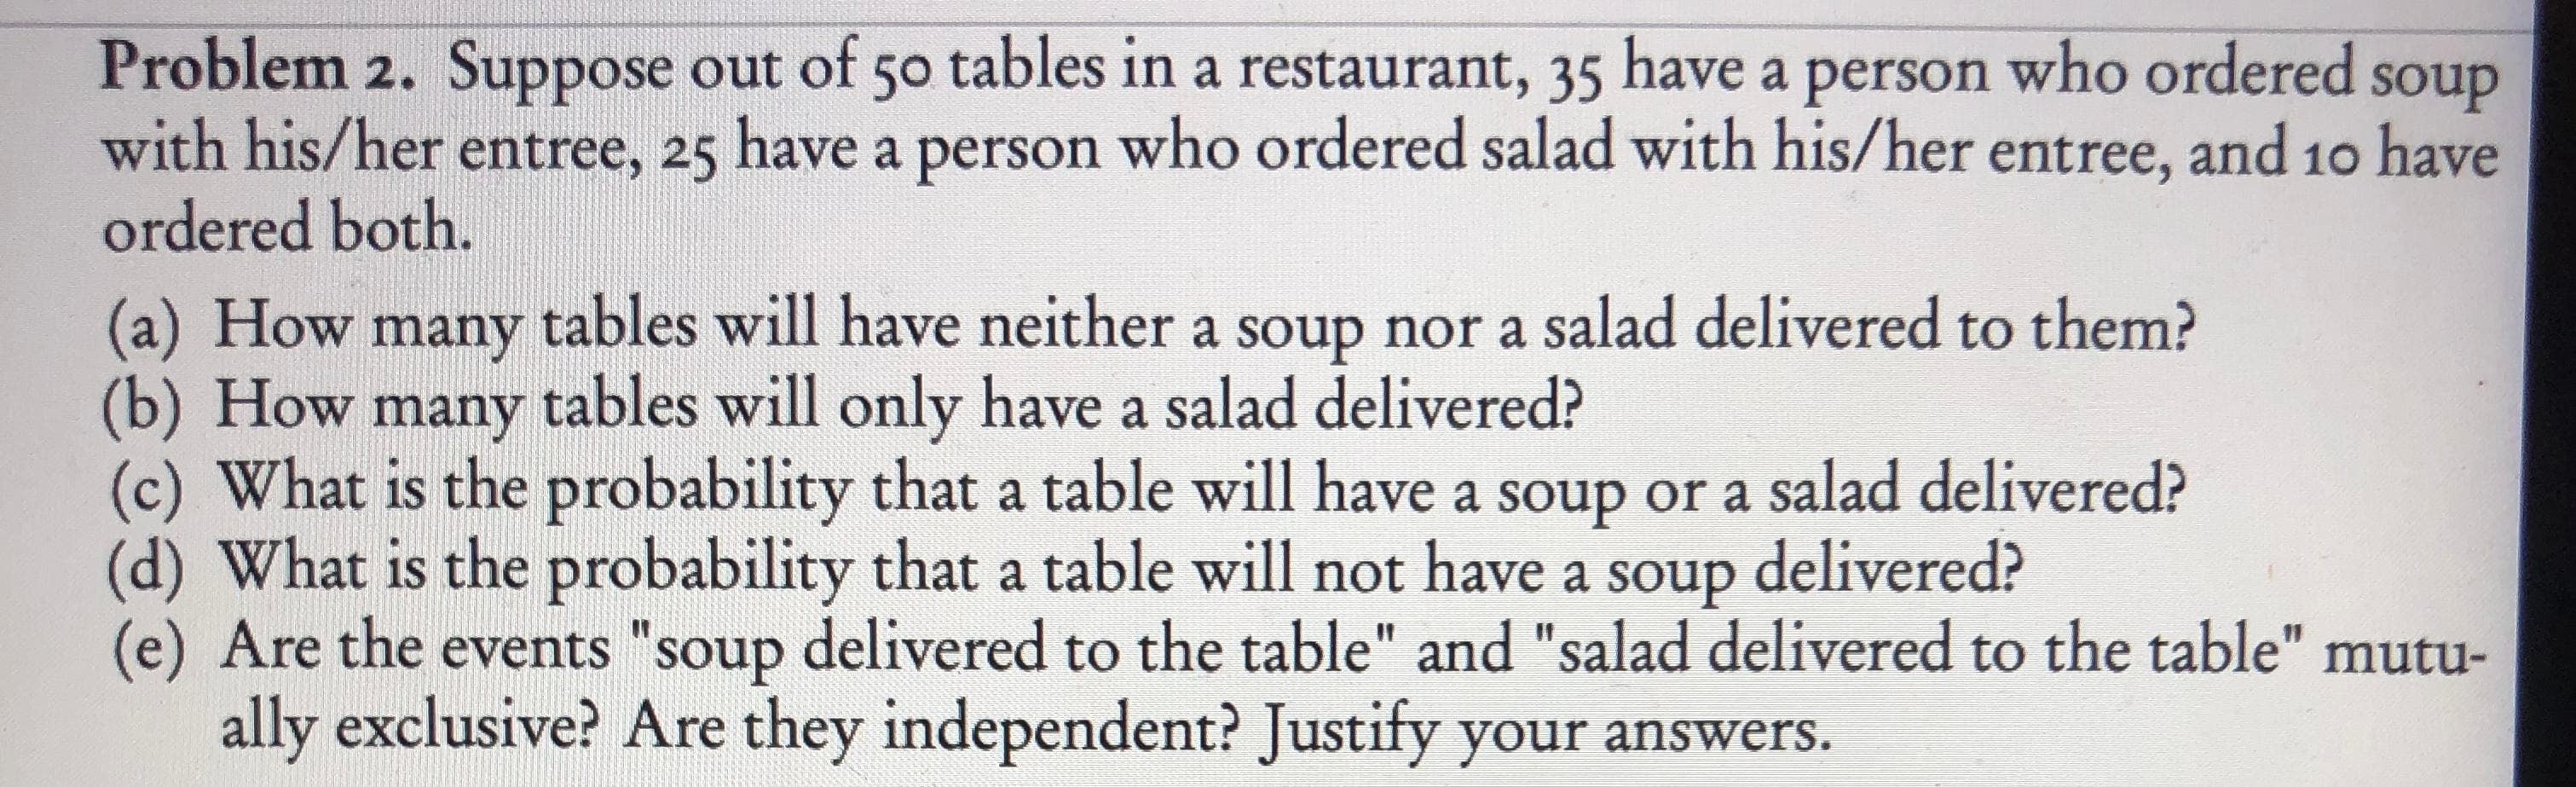 Problem 2. Suppose out of 50 tables in a restaurant, 35 have a person who ordered
with his/her entree, 25 have a person who ordered salad with his/her entree, and 10 have
ordered both.
soup
(a) How many tables will have neither a soup nor a salad delivered to them?
(b) How many tables will only have a salad delivered?
(c) What is the probability that a table will have a soup or a salad delivered?
(d) What is the probability that a table will not have a soup delivered?
(e) Are the events "soup delivered to the table" and "salad delivered to the table" mutu-
ally exclusive? Are they independent? Justify your answers.
